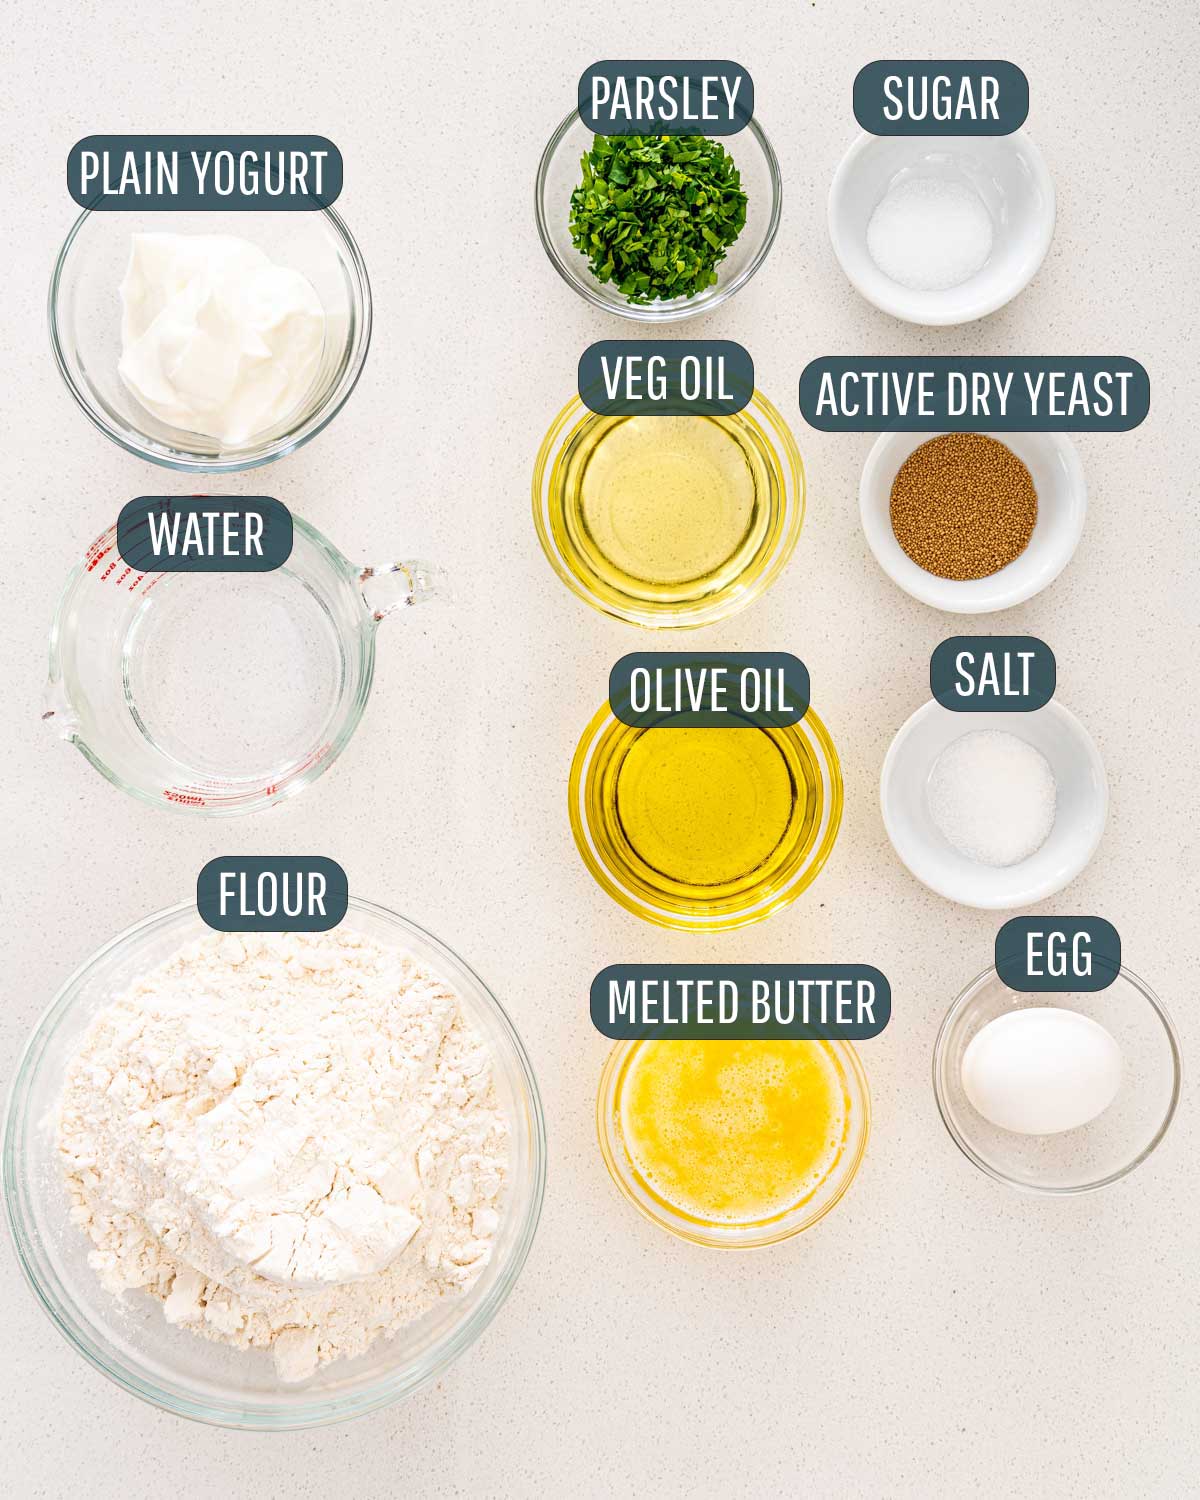 overhead shot of all the ingredients needed to make naan bread.